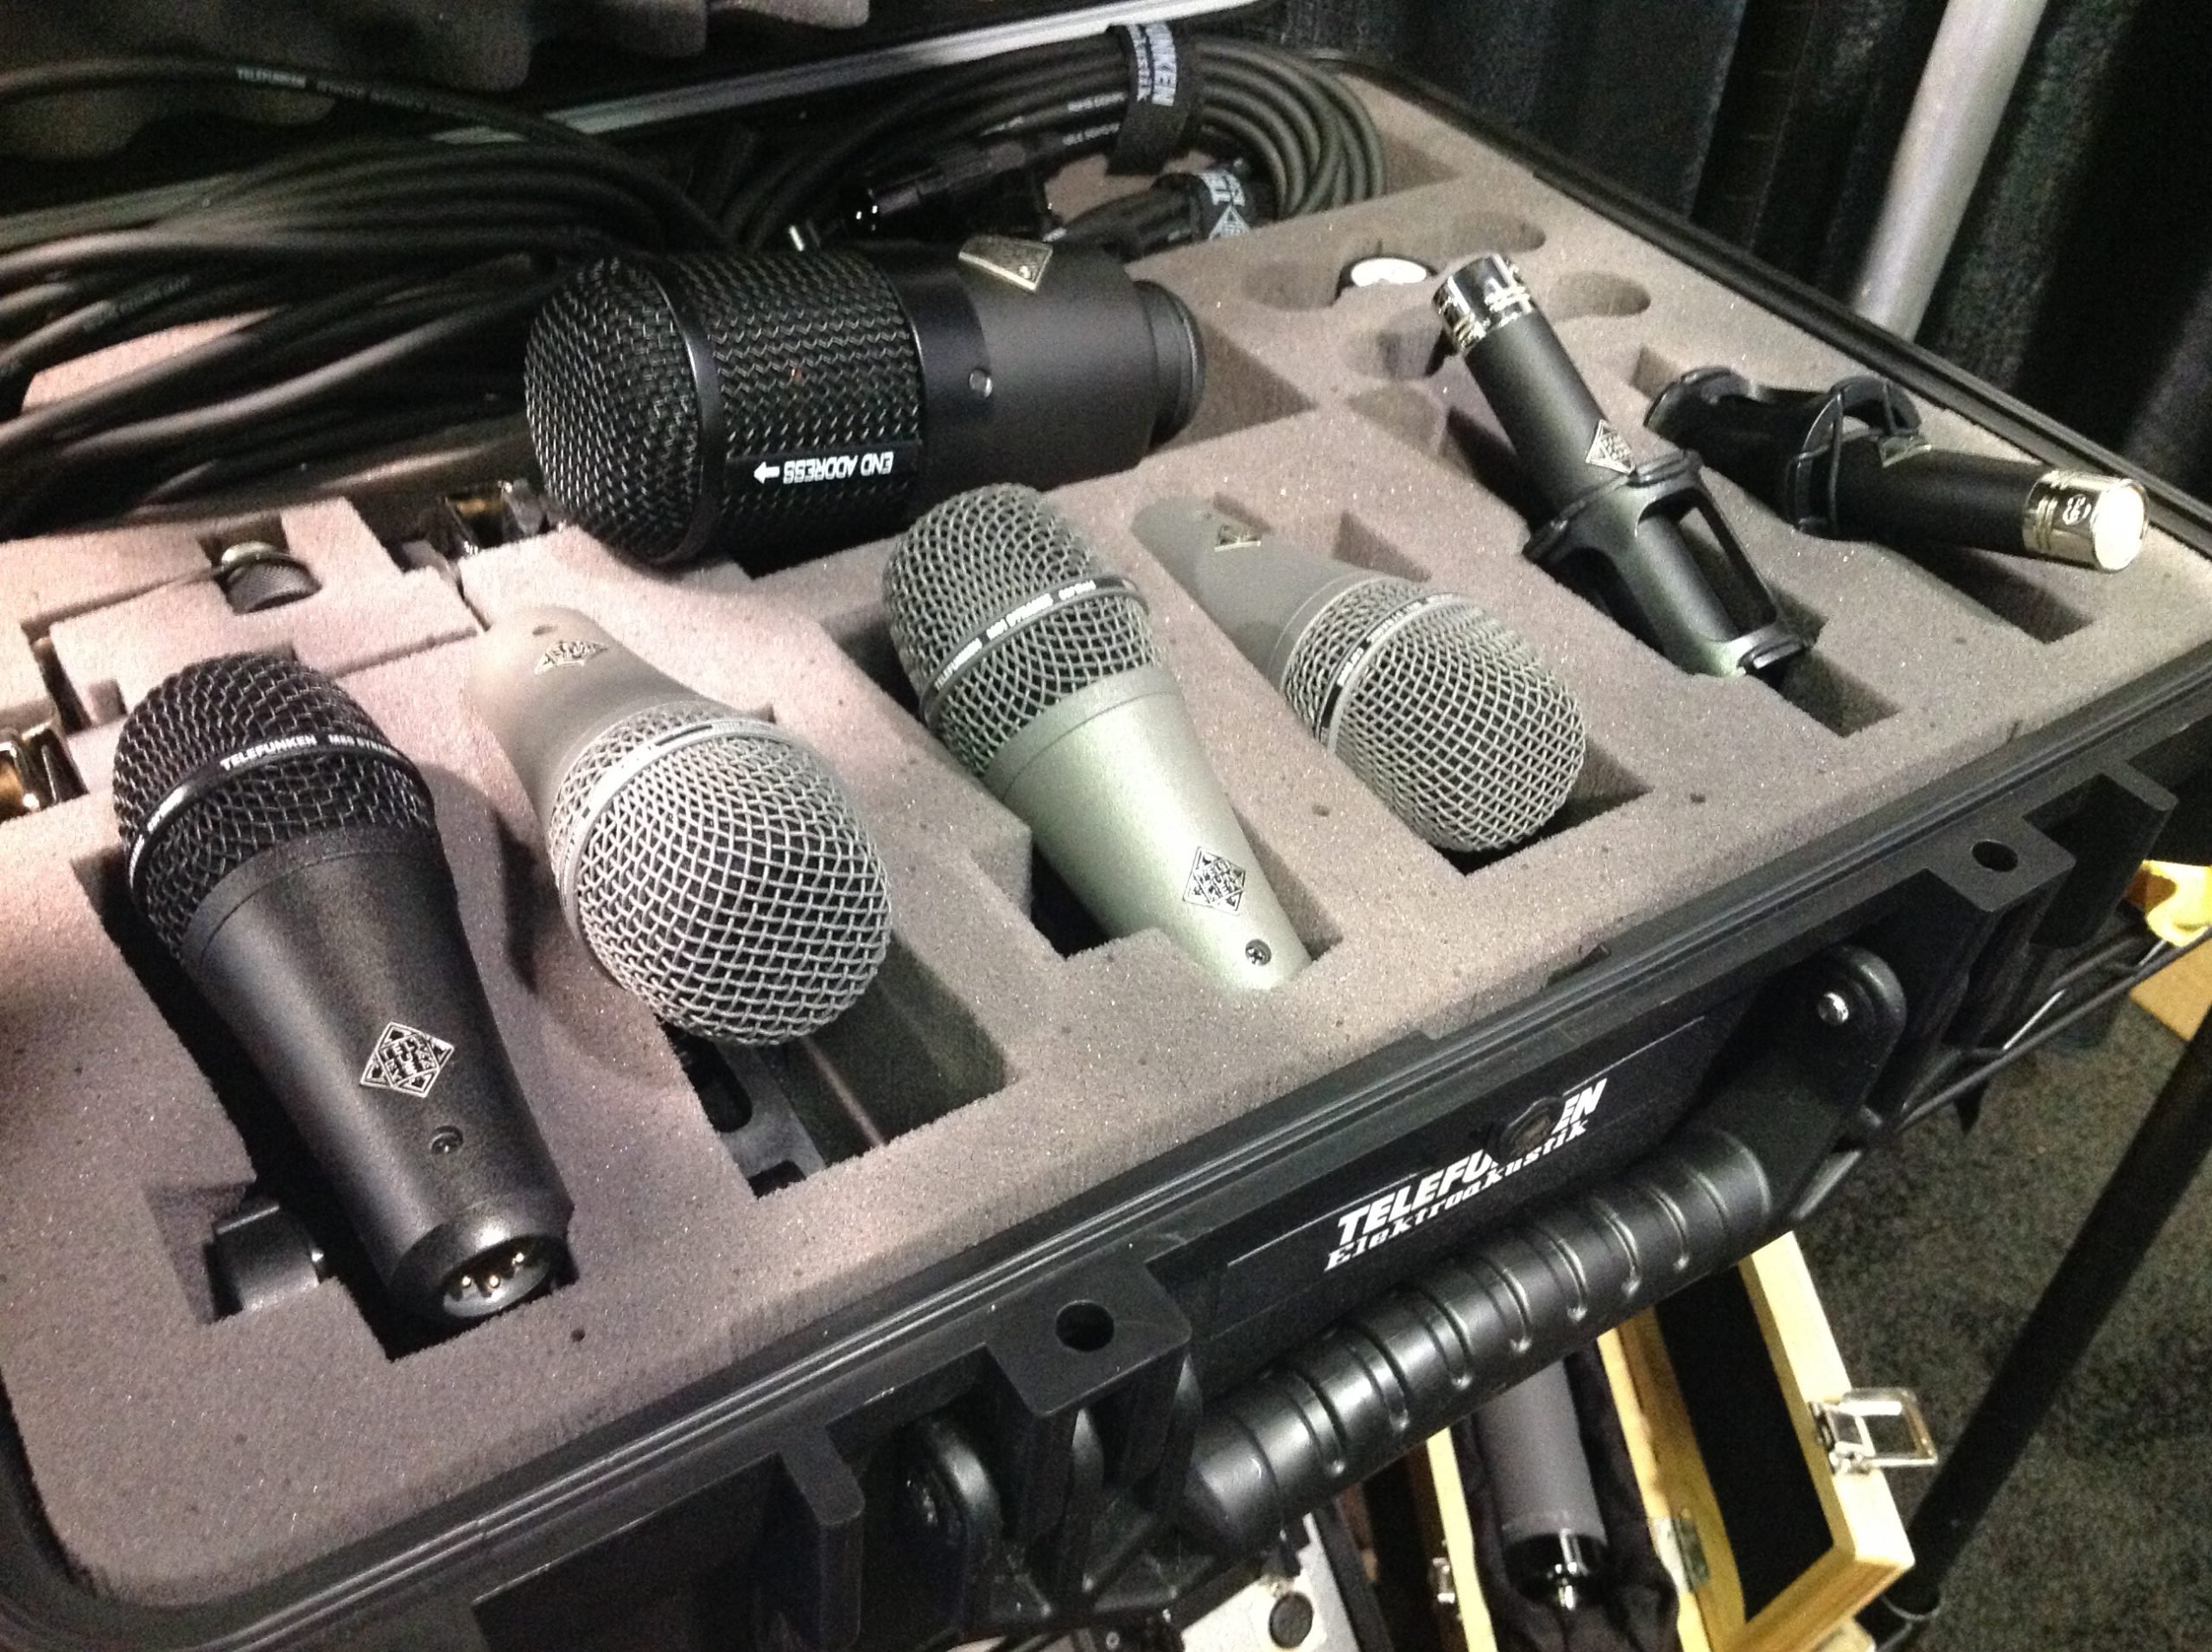 Shure's SM7dB: Reinventing a Legend